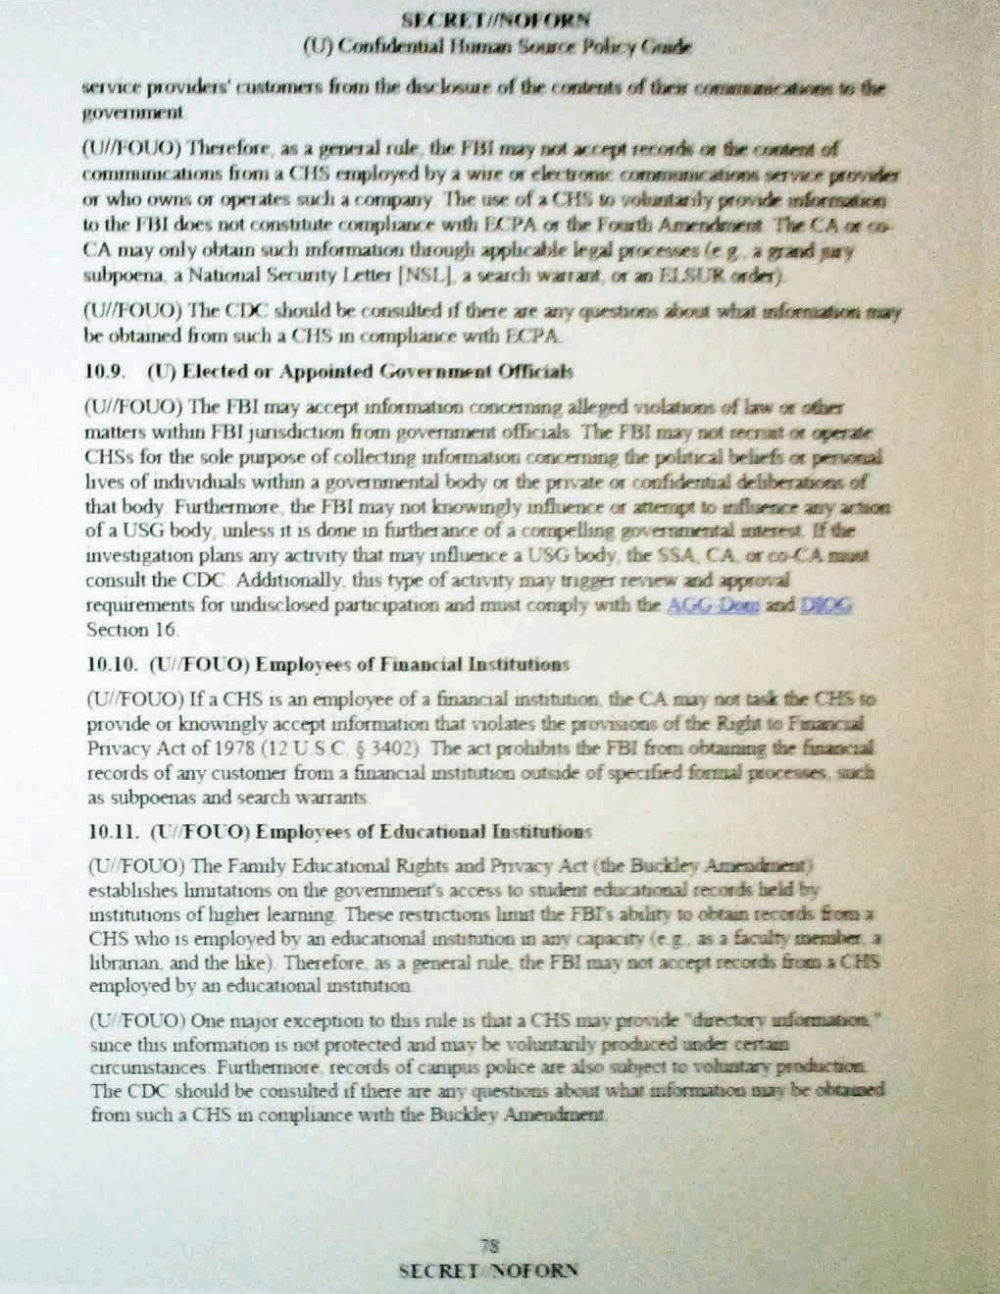 Page 88 from Confidential Human Source Policy Guide